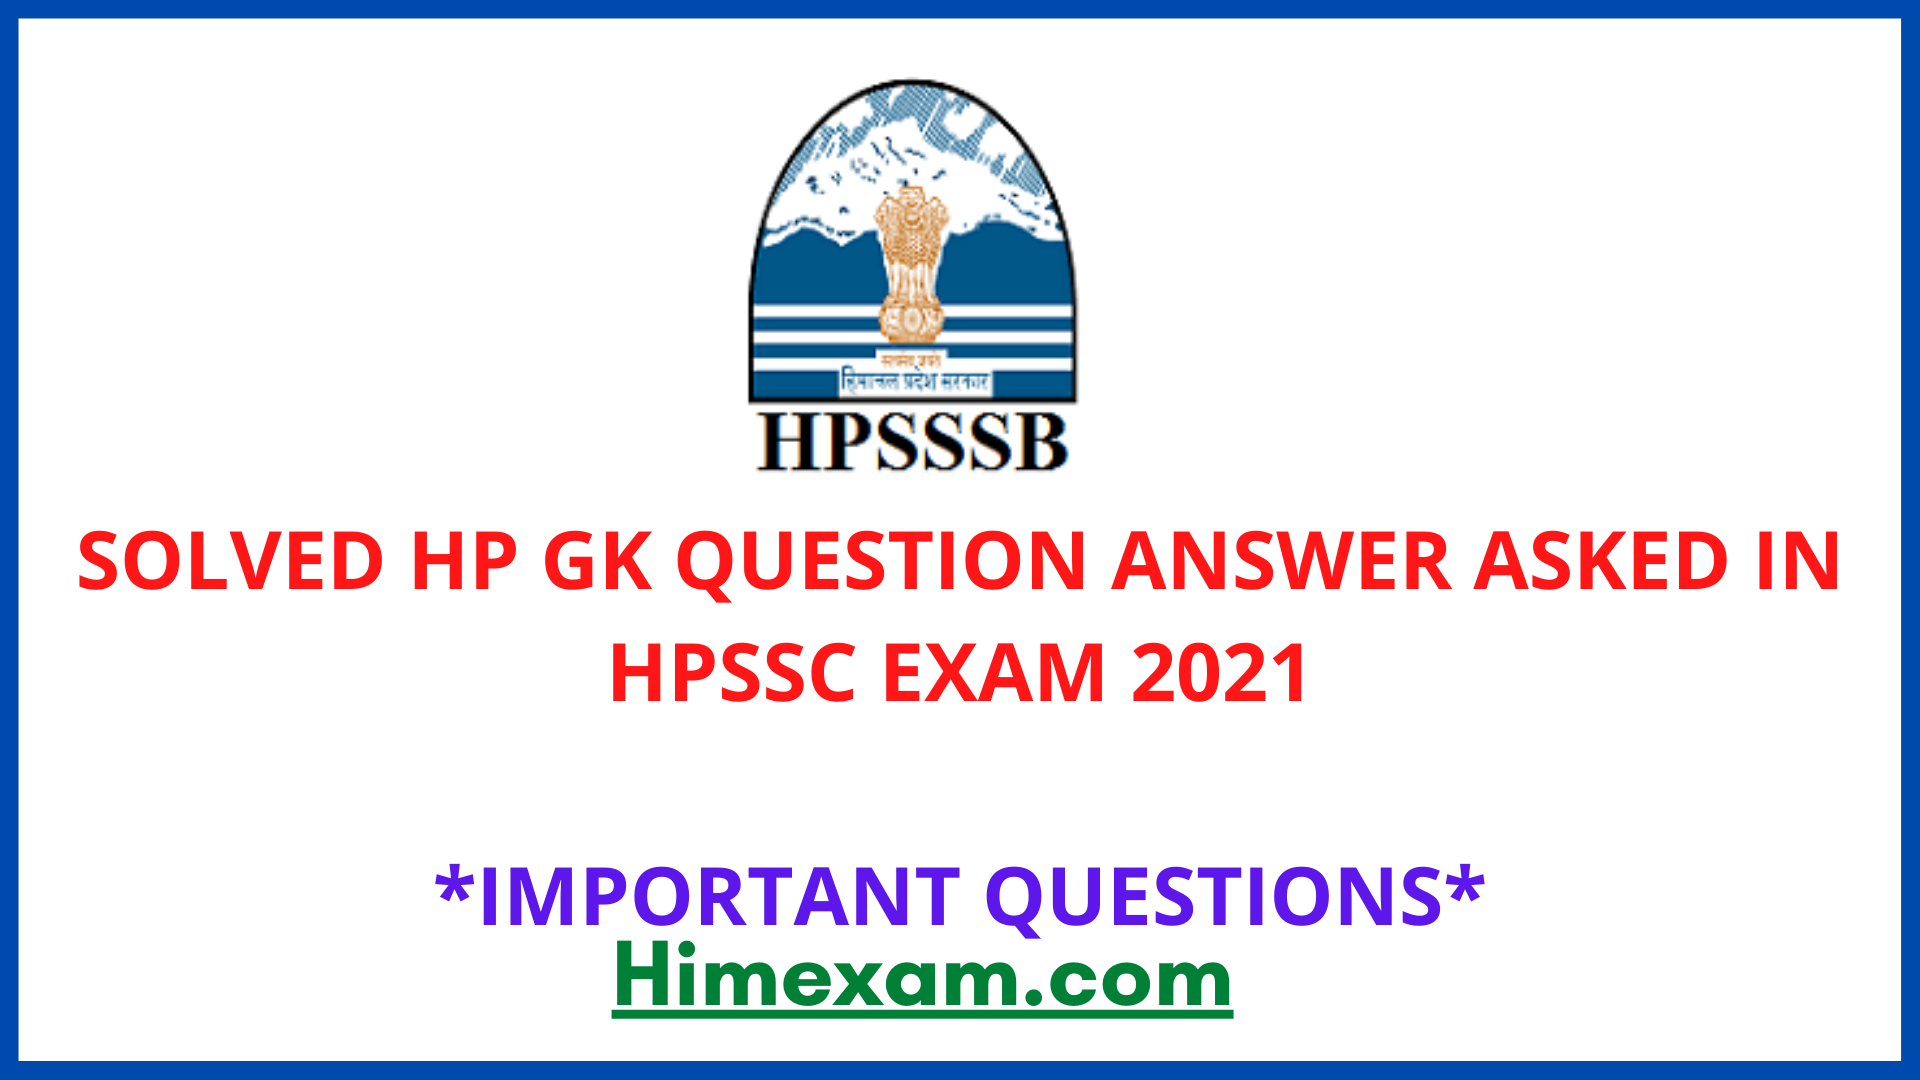 Solved HP GK Question Answer Asked In HPSSC Exam 2021